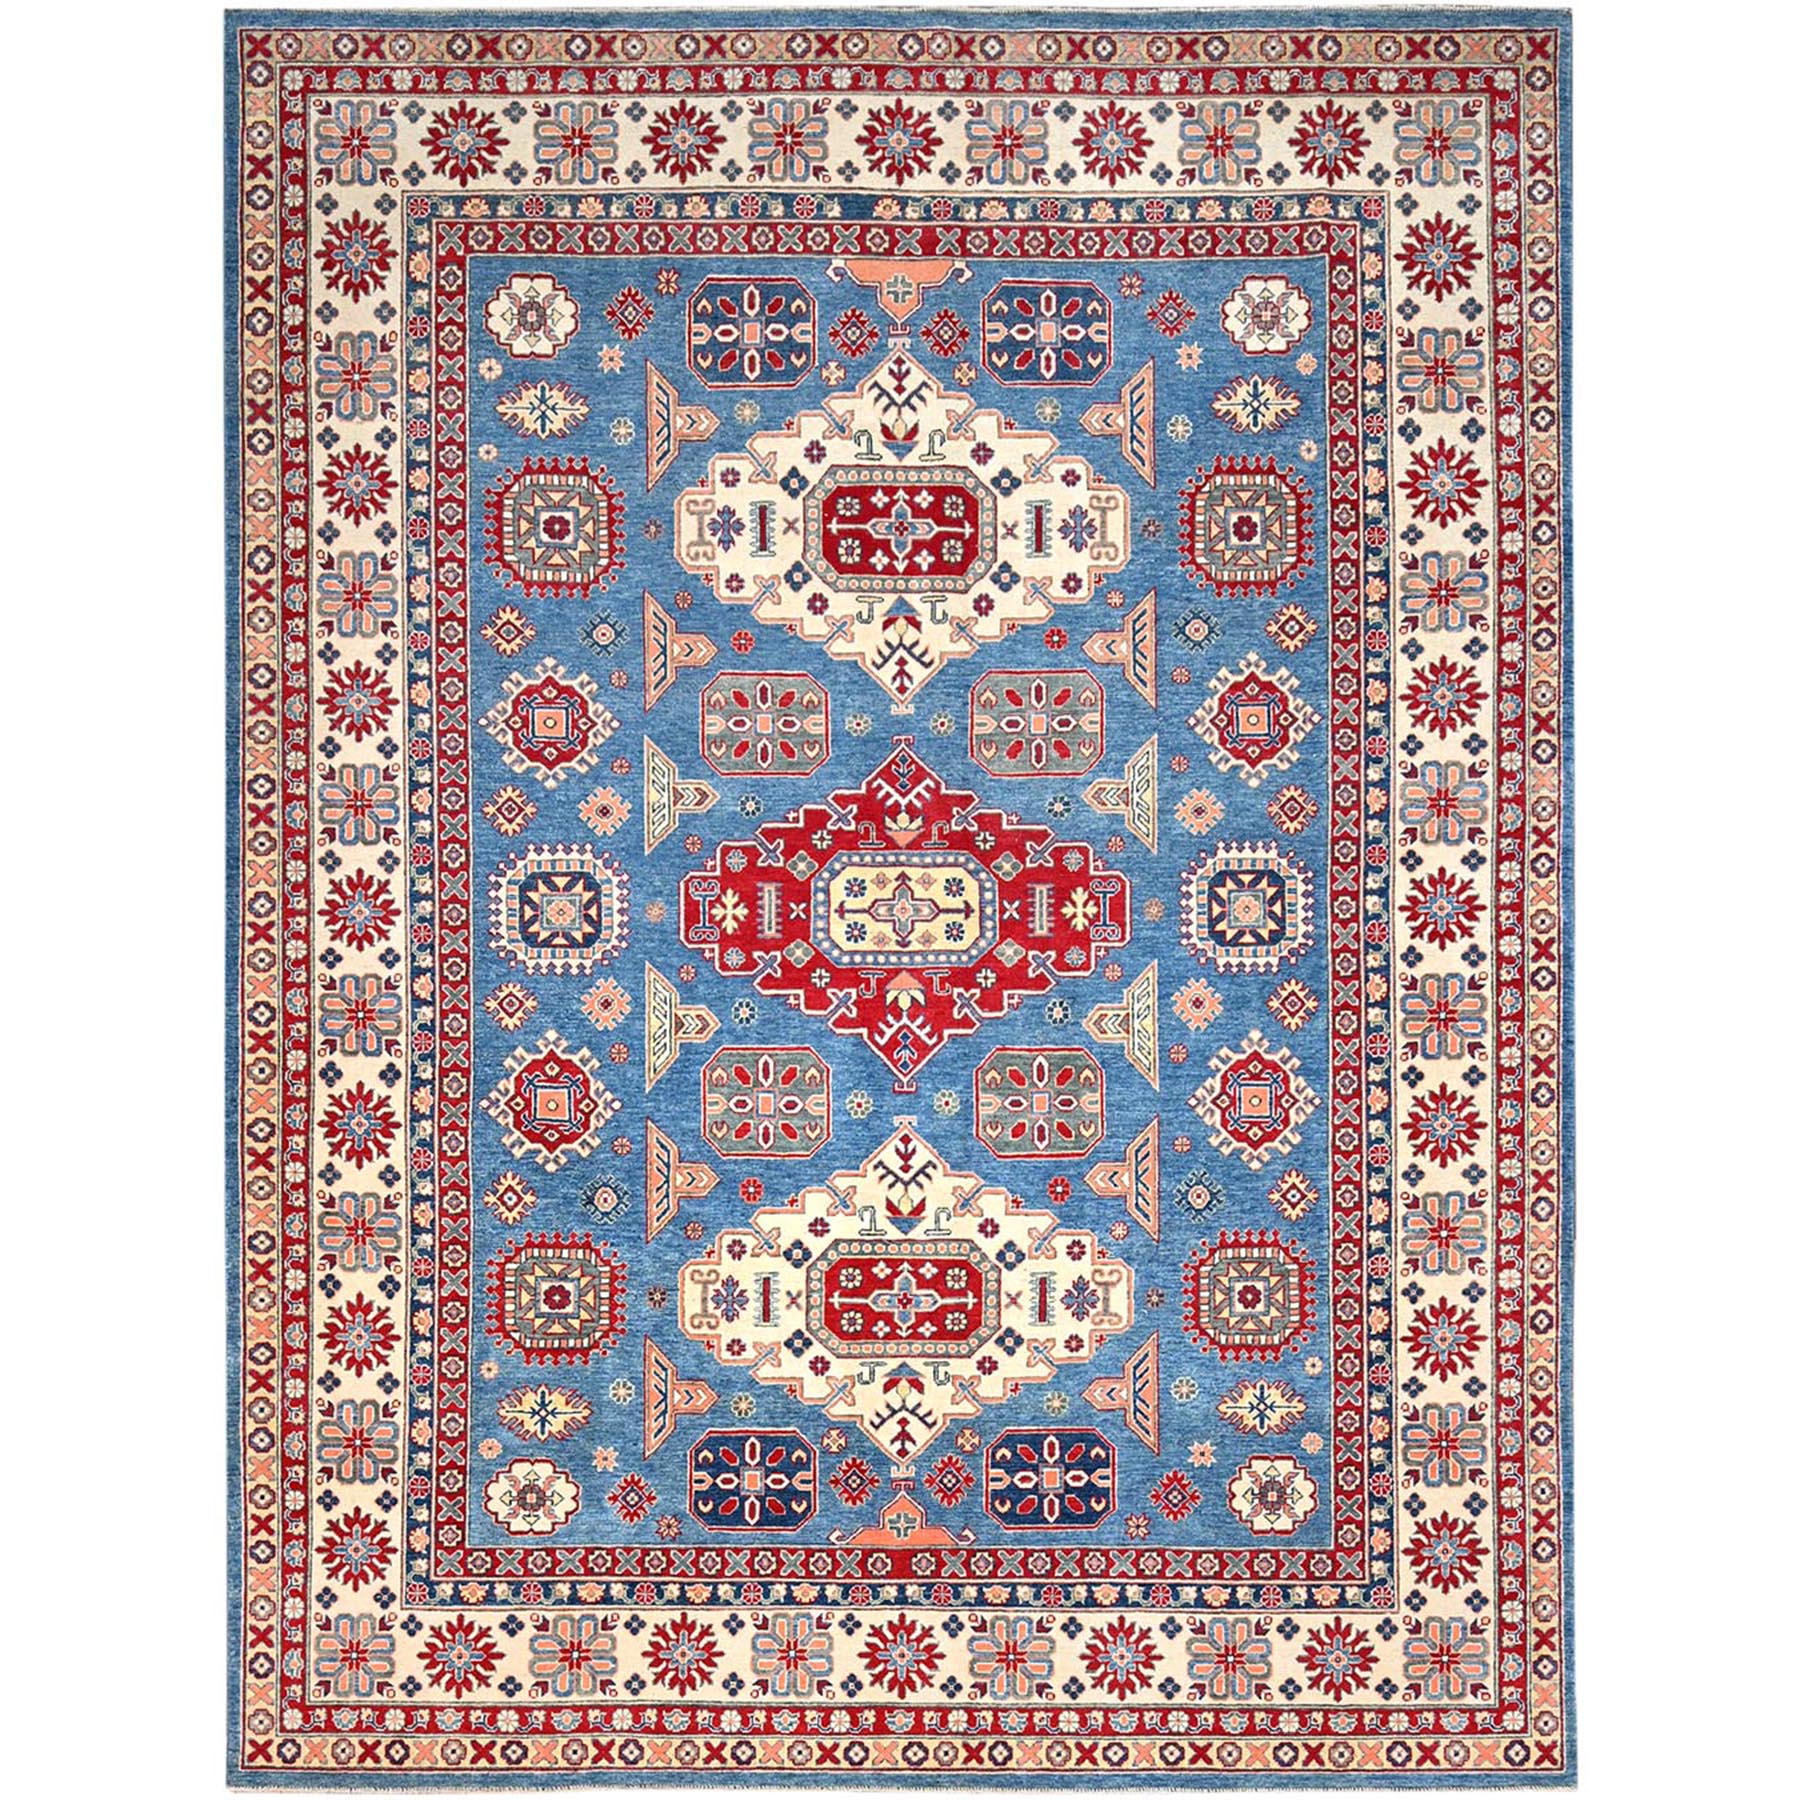 Lichen Blue With Atrium White, Densely Woven All Wool, Hand Knotted Kazak With Triple Medallions, Natural Dyes, Oriental Rug